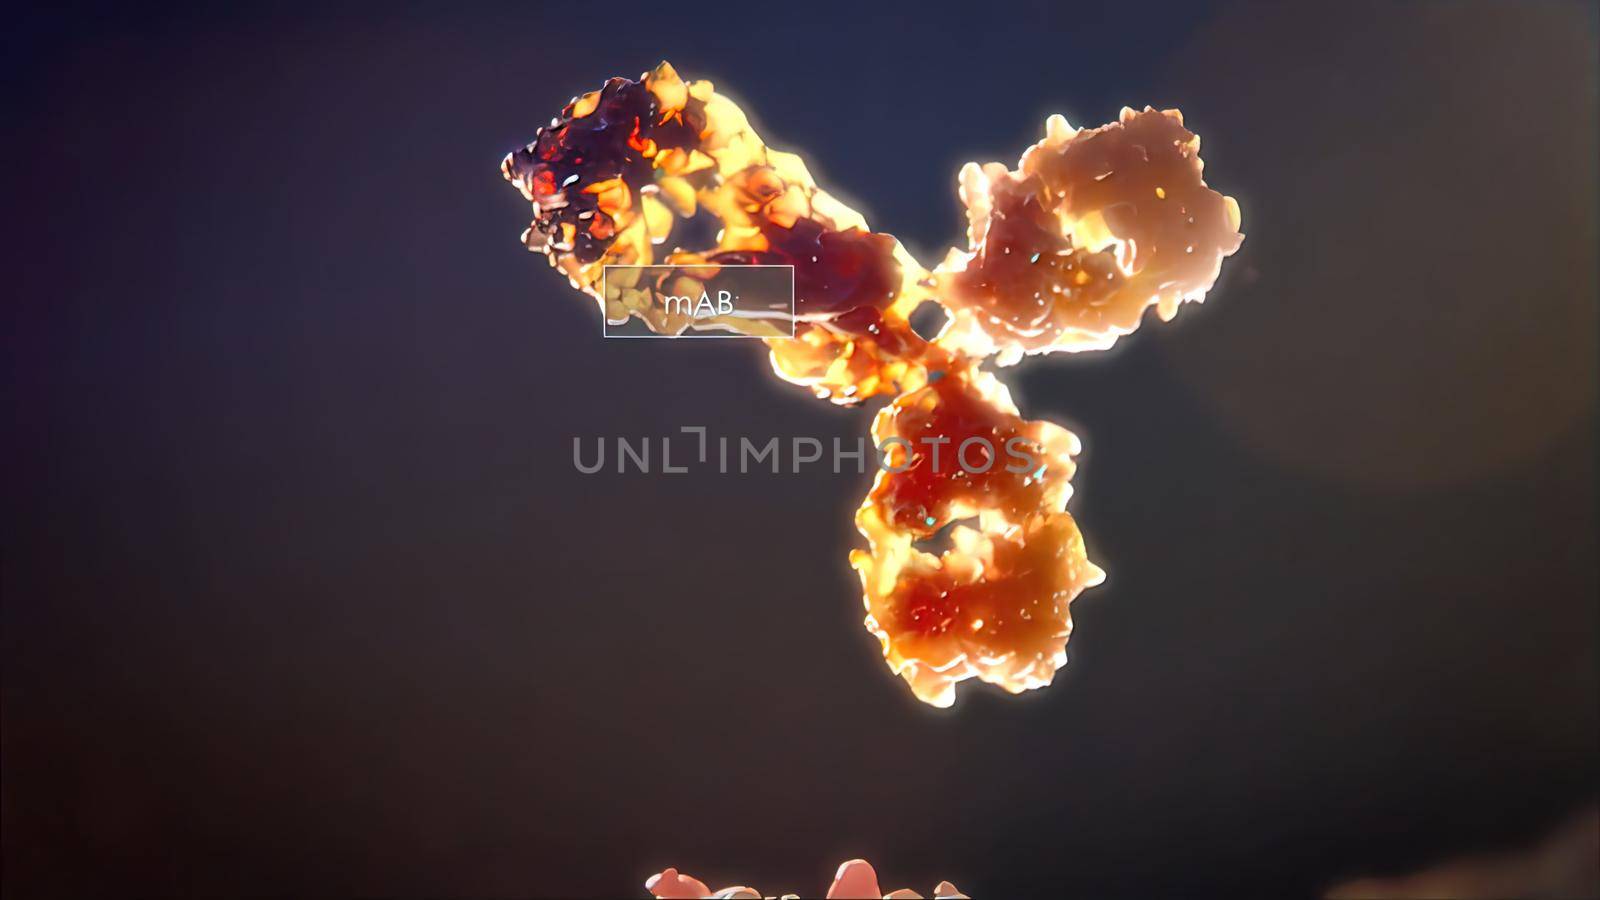 The functioning of antibodies in the immune system. 3D illustration